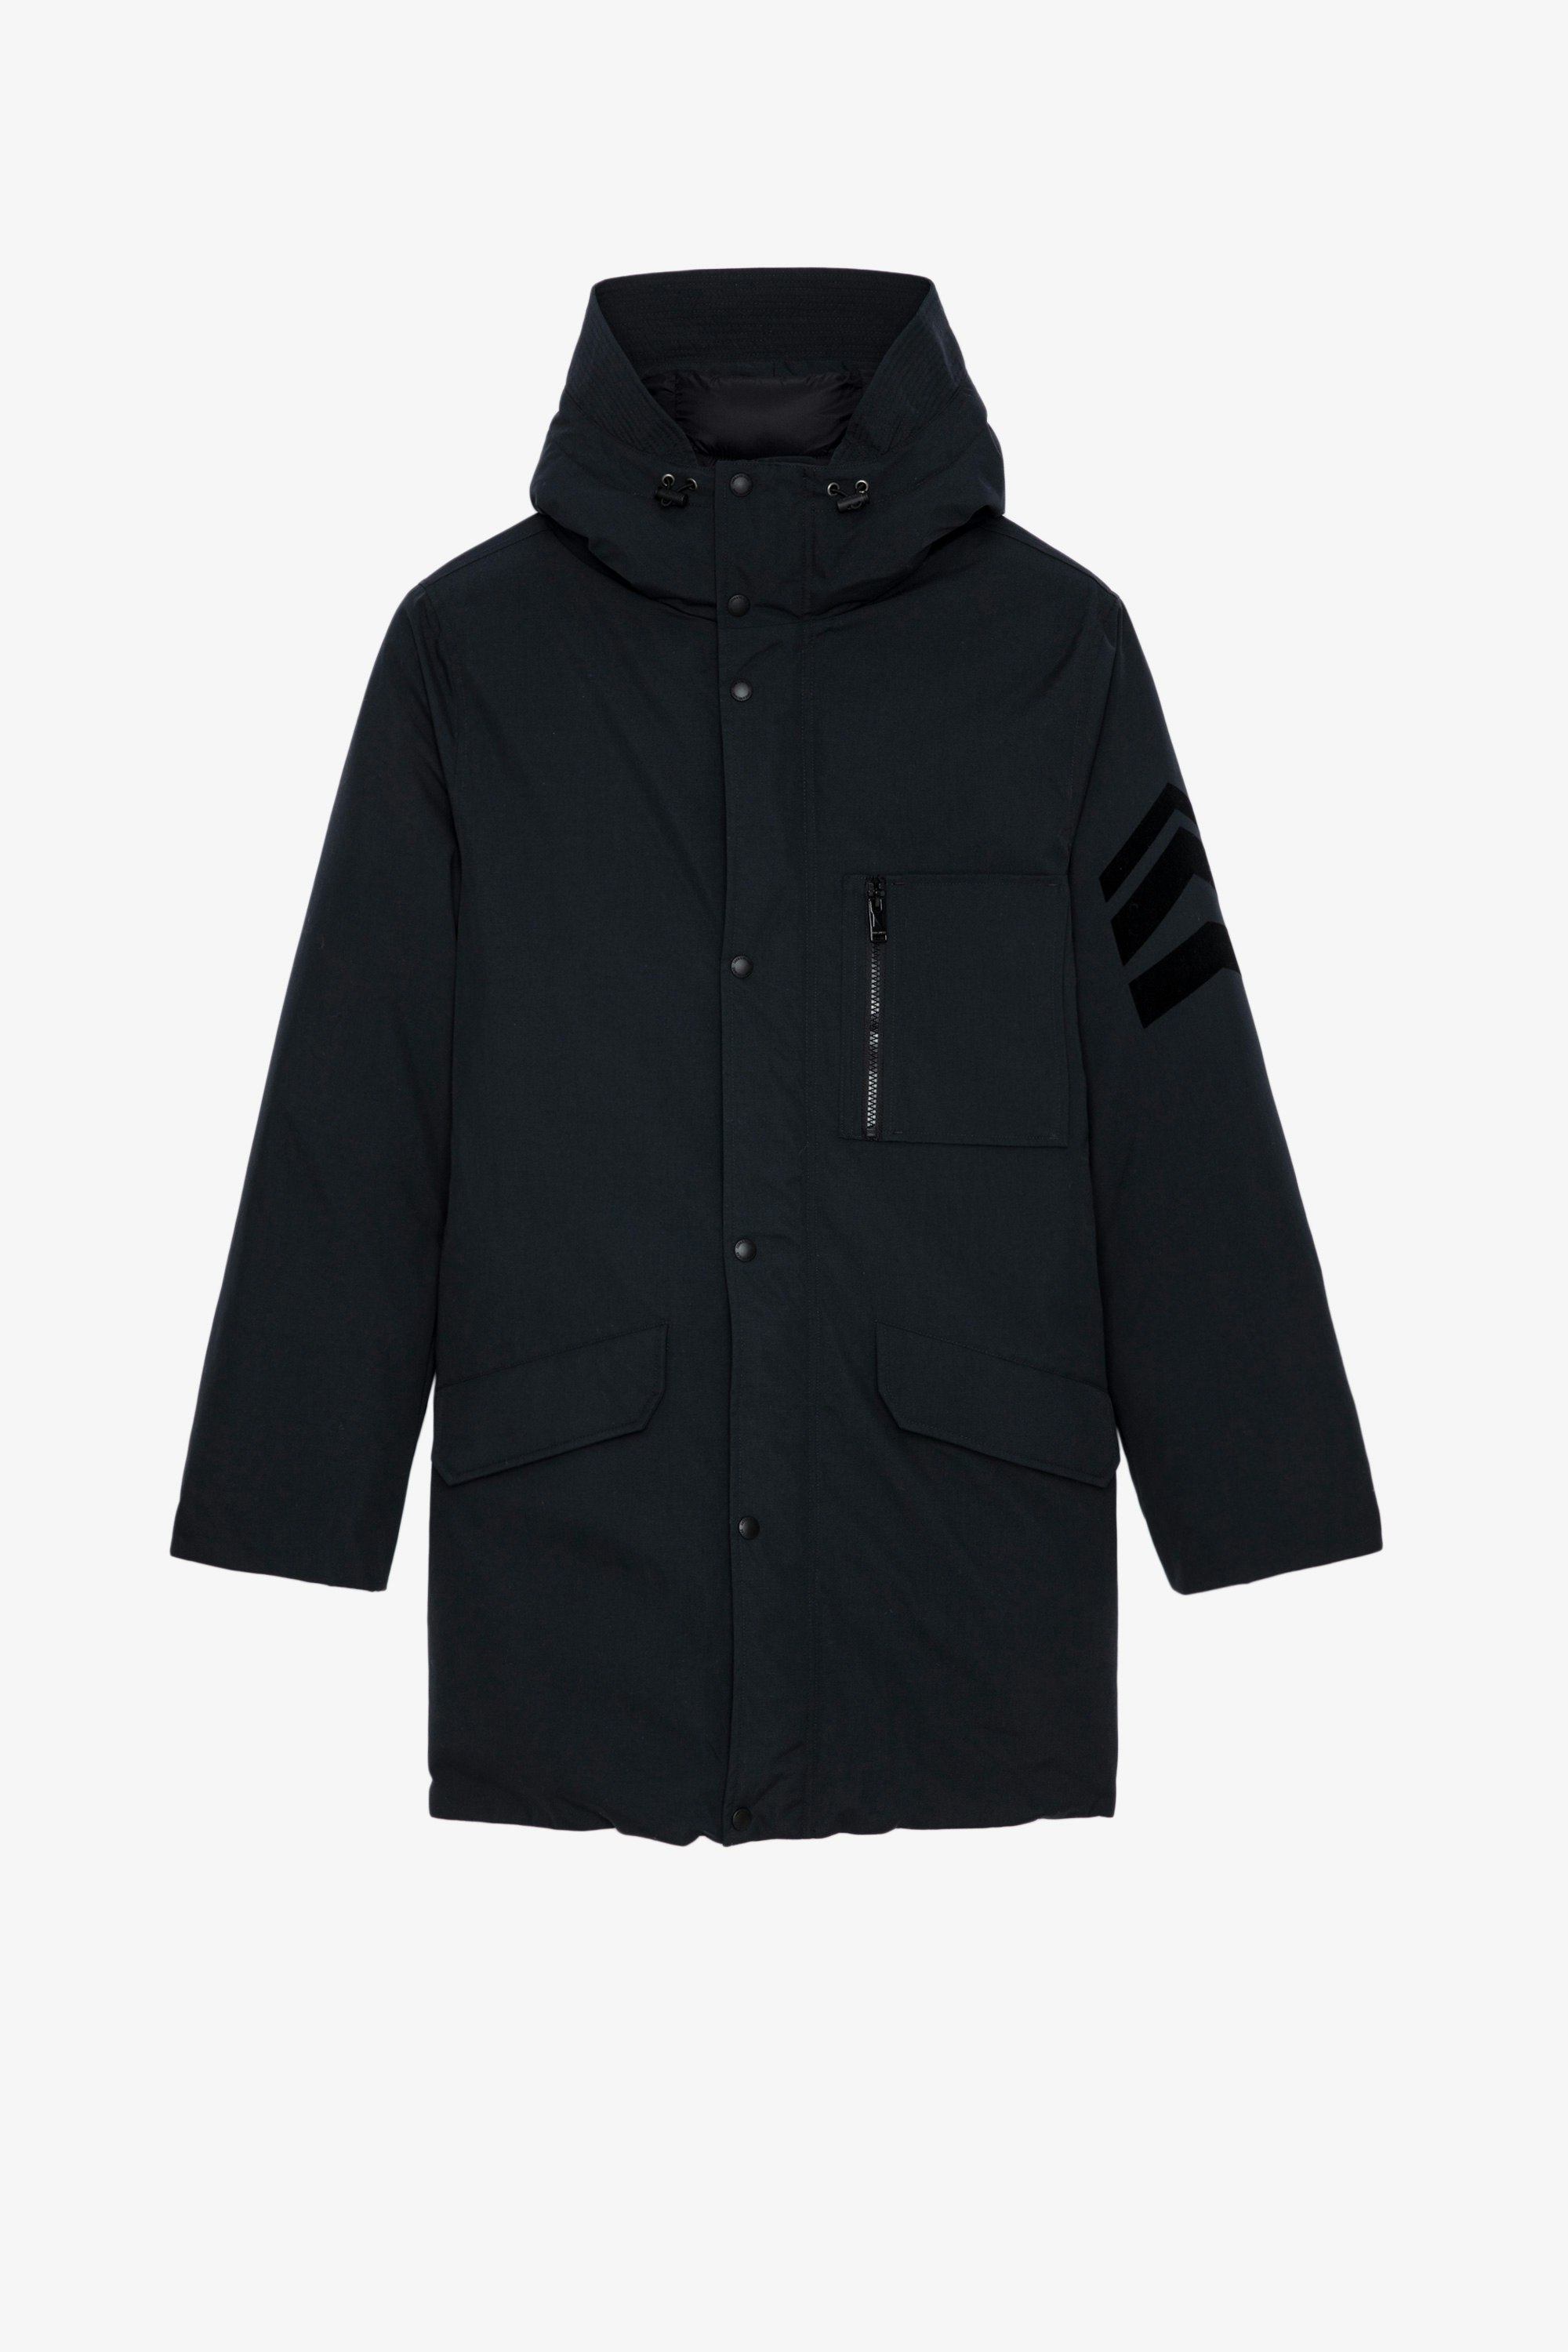 Kimmy Technical Parka Men ‘s quilted technical parka in black nylon with oversized hood and arrows on the sleeve